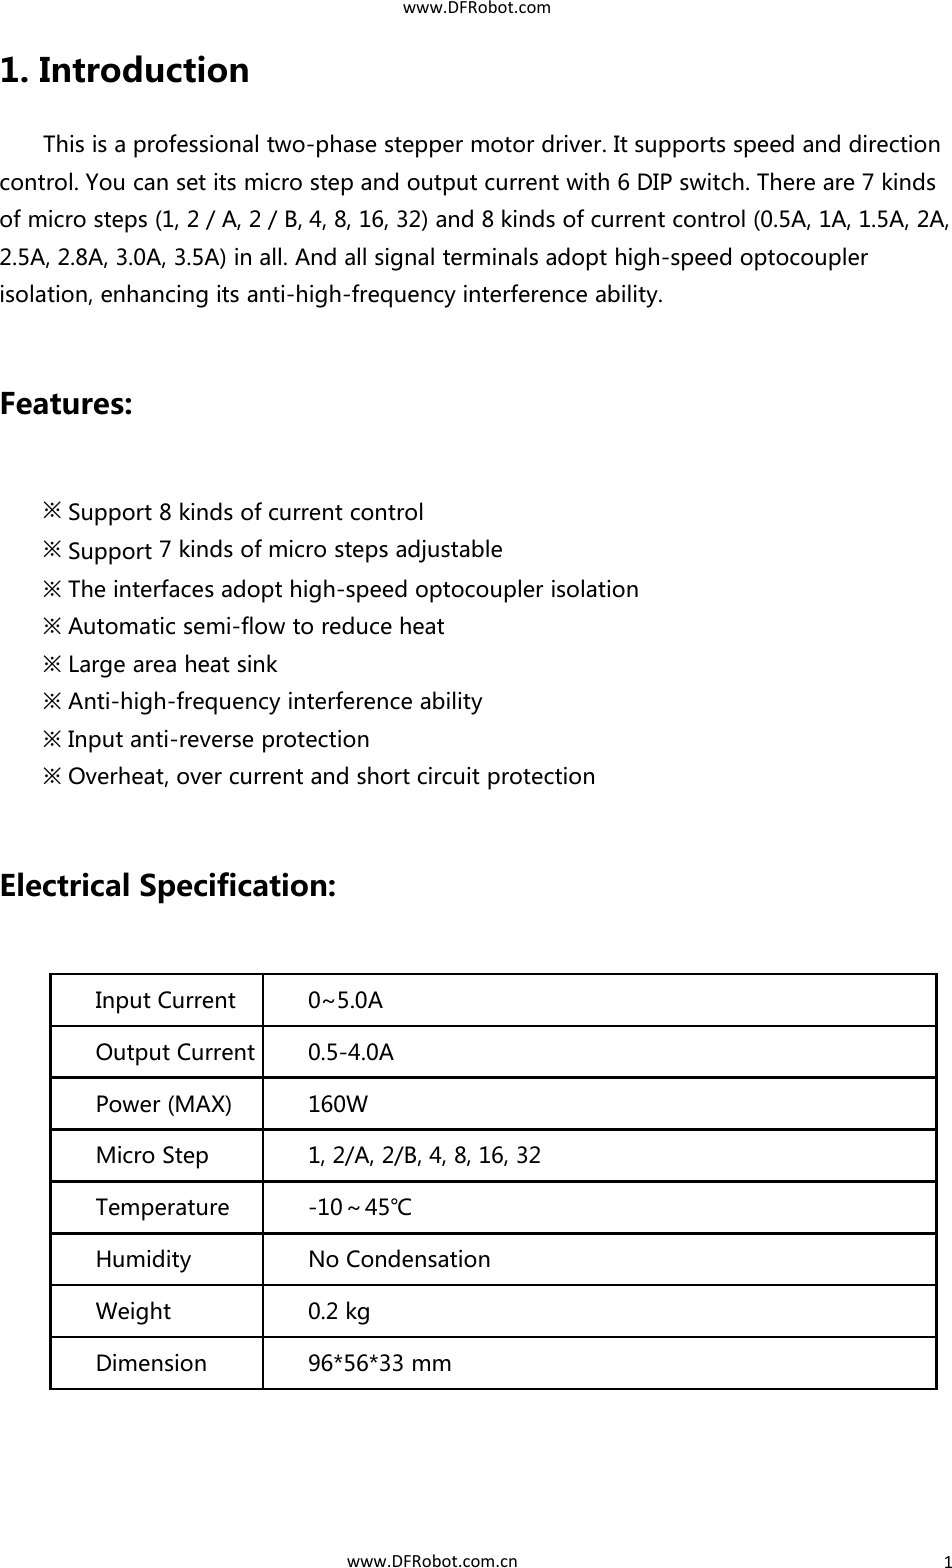 Page 4 of 11 - TB6600 User Guide V1.2